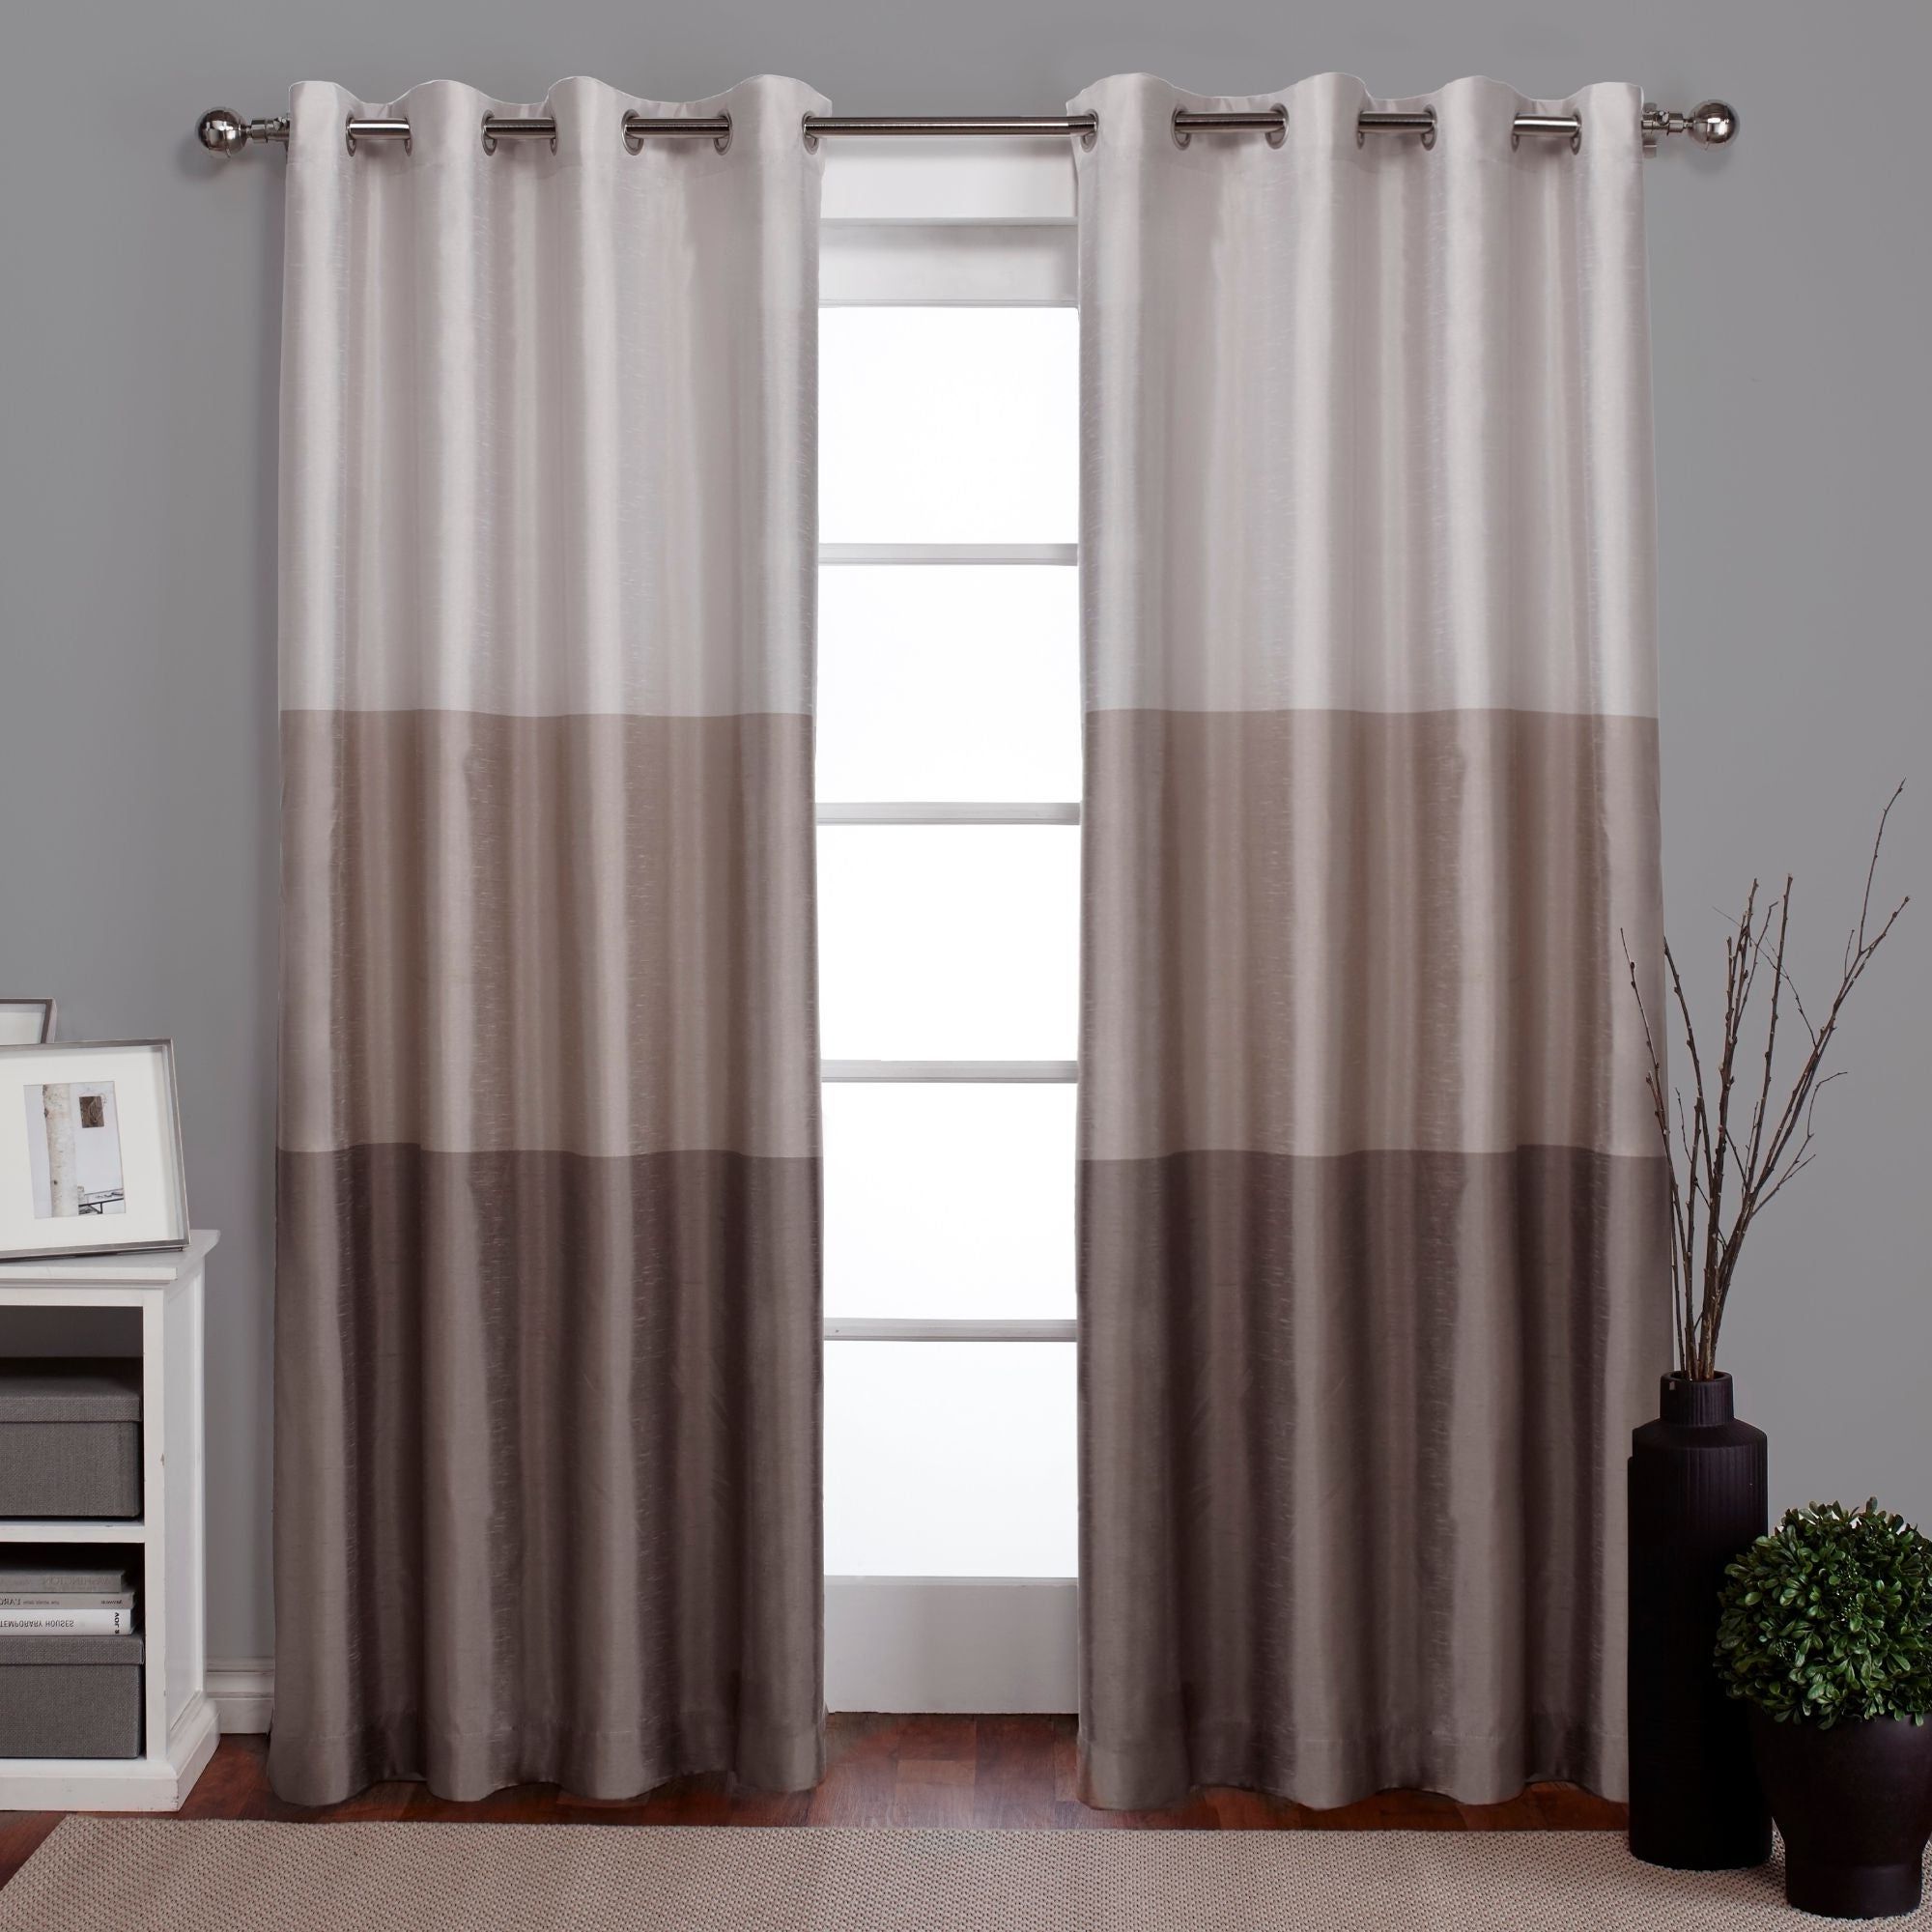 Featured Photo of Ocean Striped Window Curtain Panel Pairs With Grommet Top